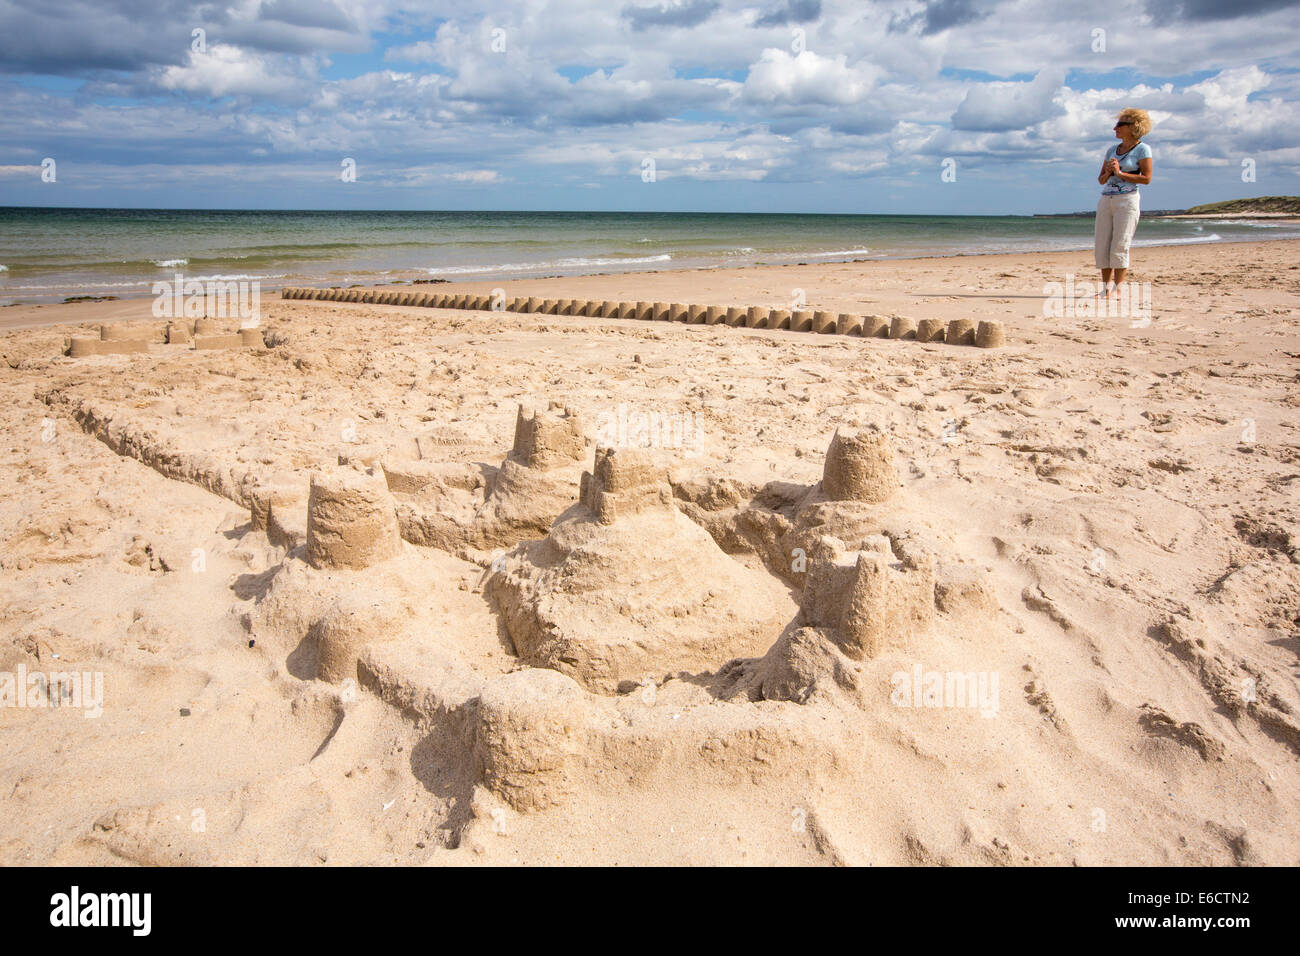 A line of sandcastles on a beach in Northumberland, UK. Stock Photo